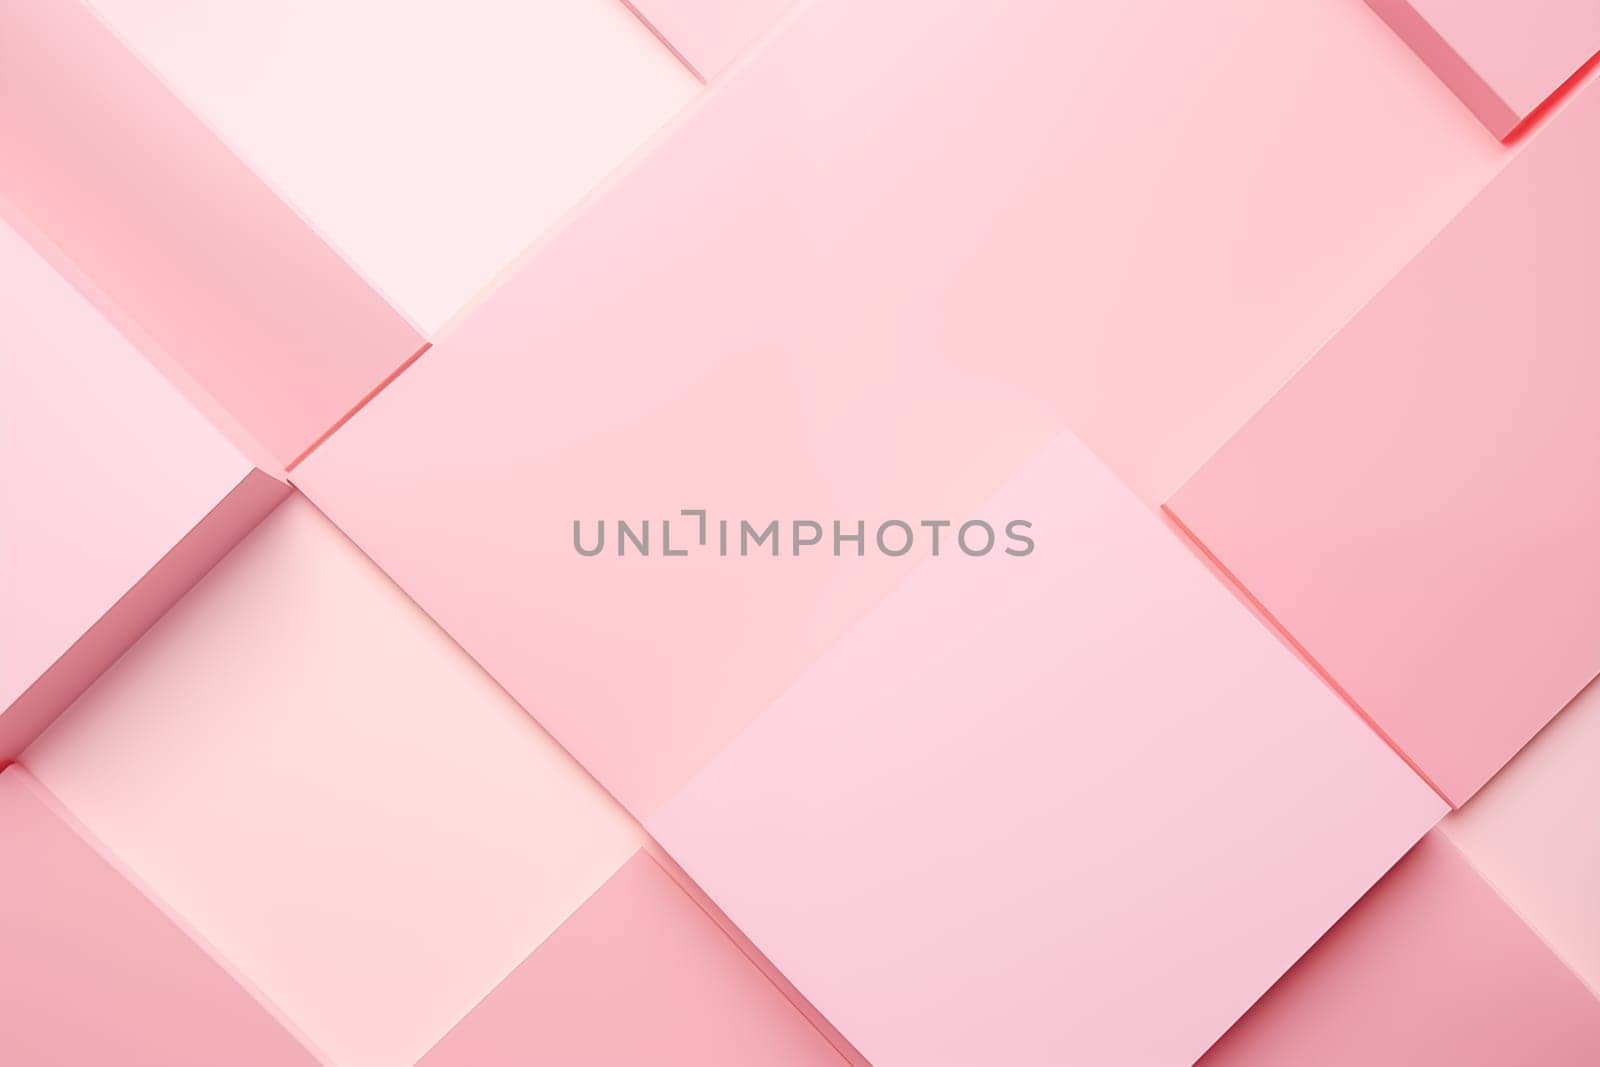 Abstract pastel pink colored paper texture geometric shapes and lines minimalist background flat lay copy space by Nadtochiy